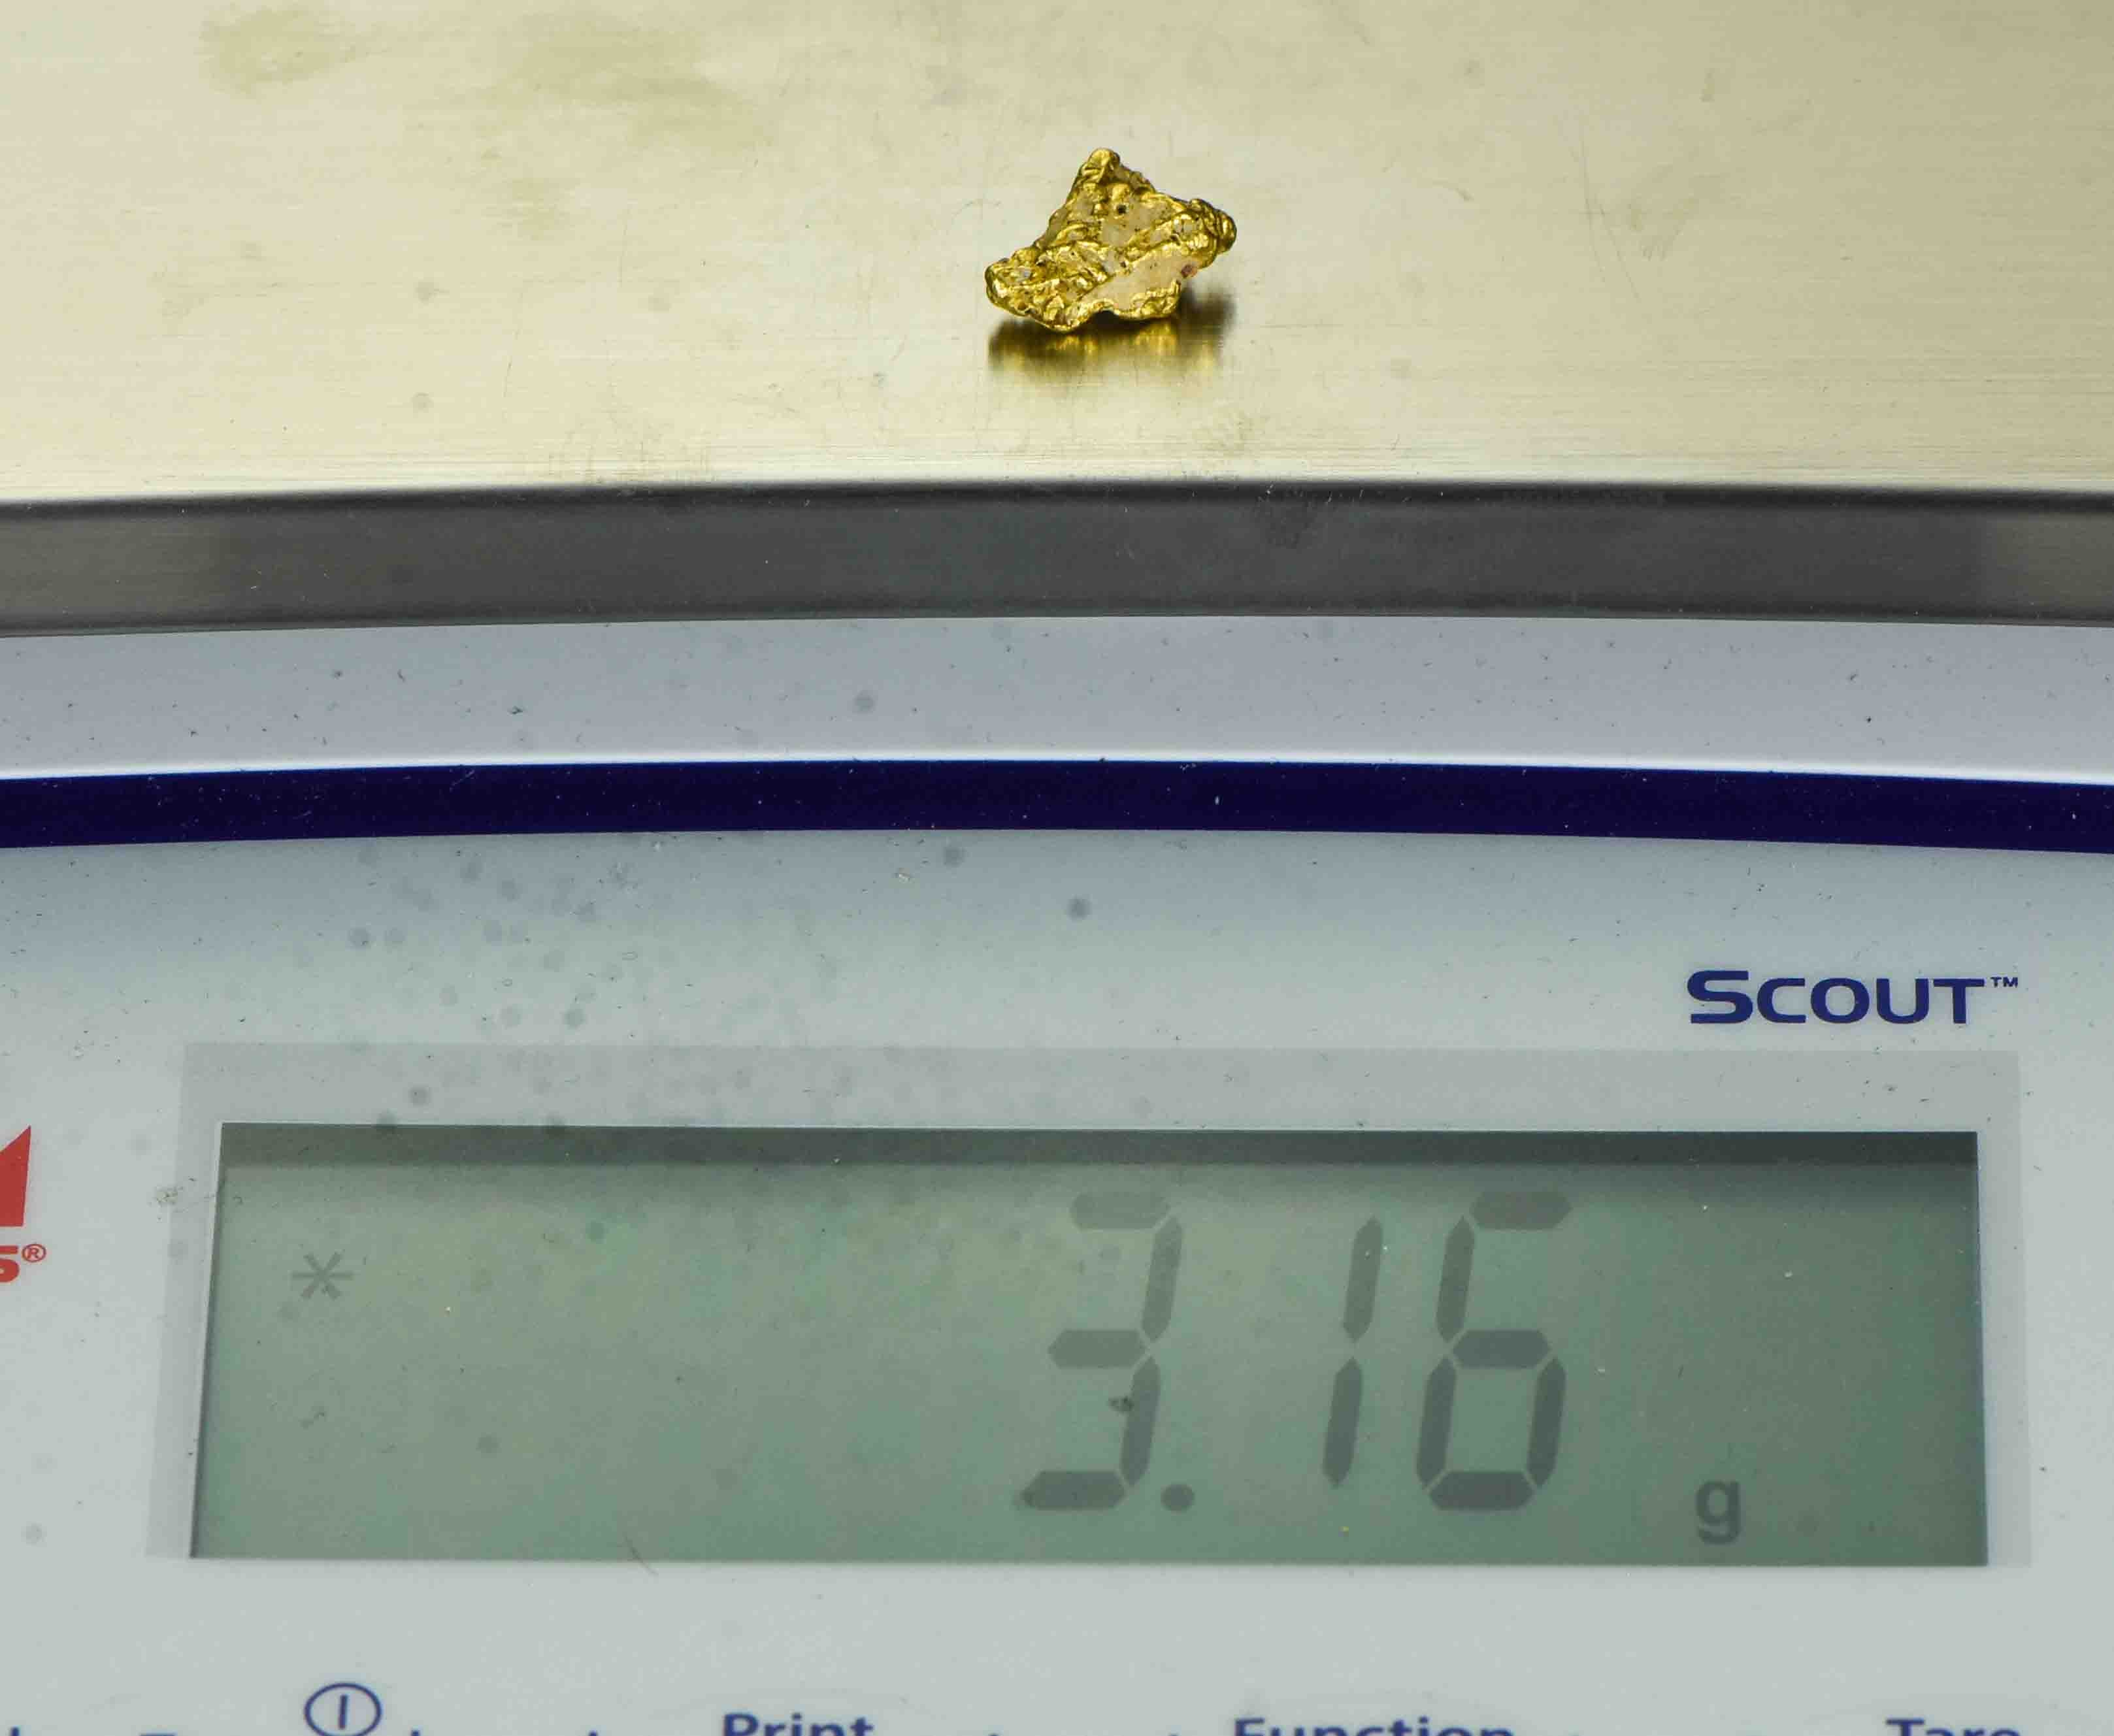 #21 Australian Natural Gold Nugget With Quartz Weighs 3.16 Grams.